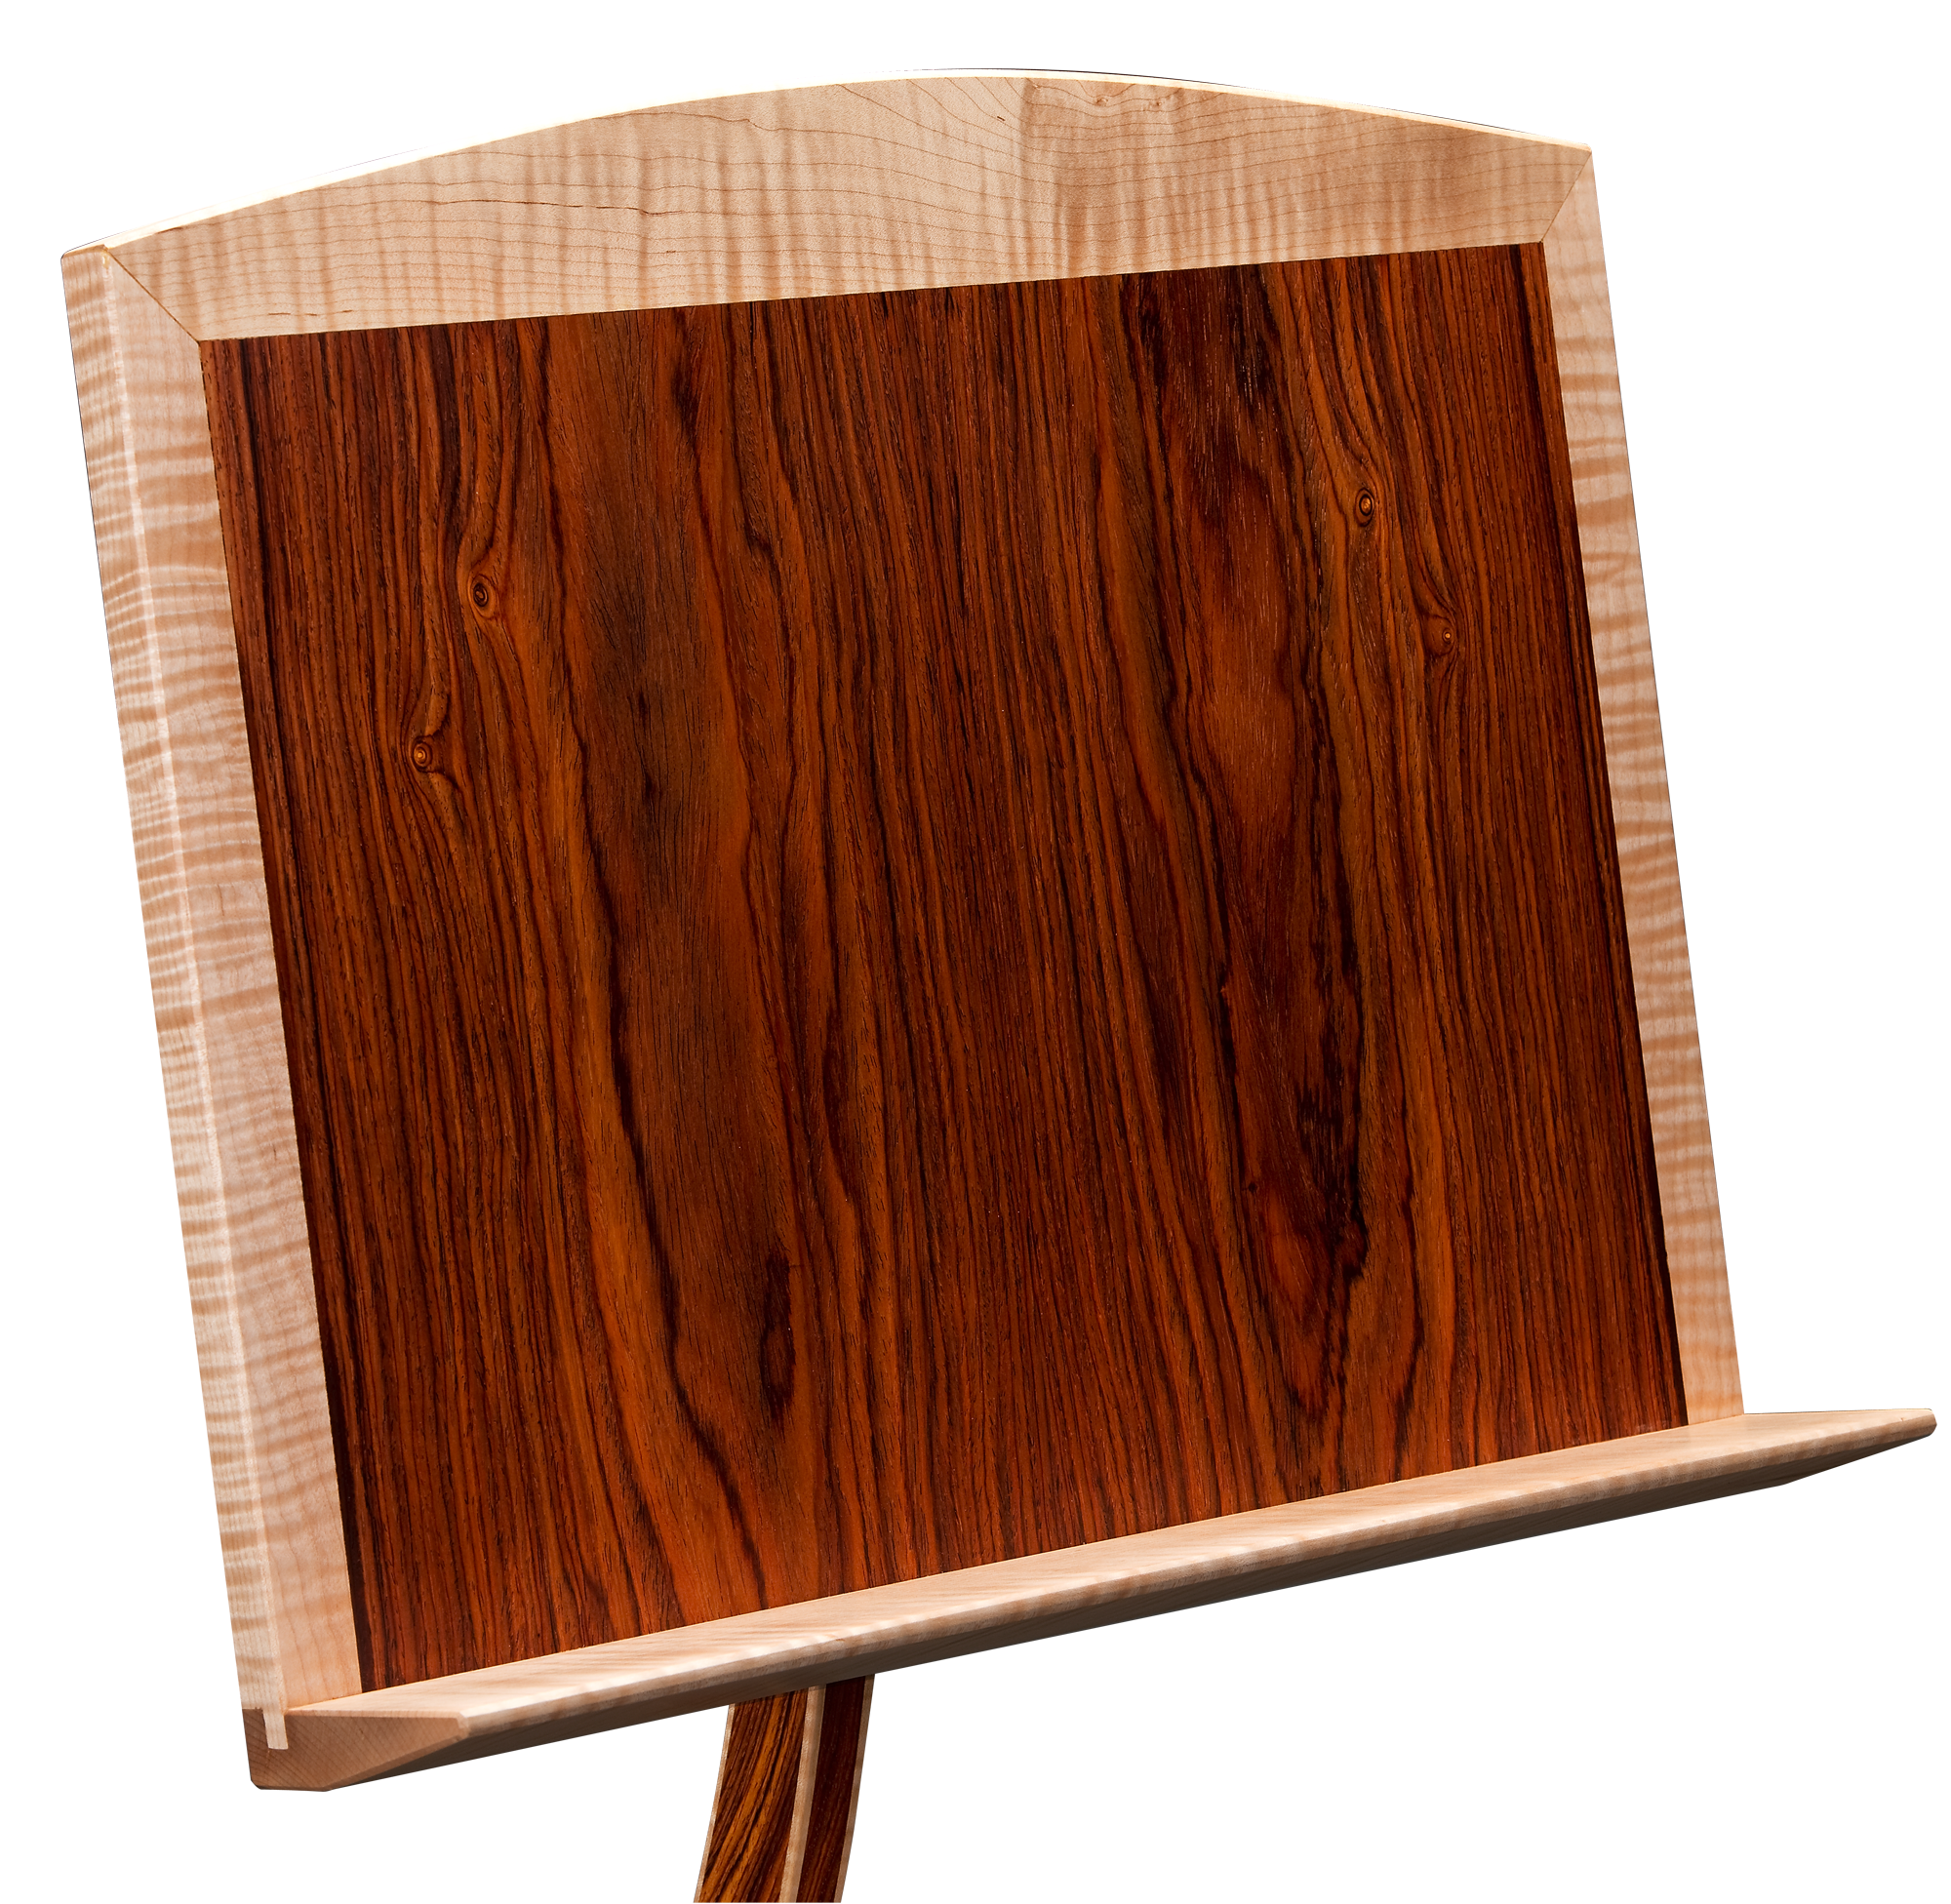 Music stand in cocobolo with curly maple trim.